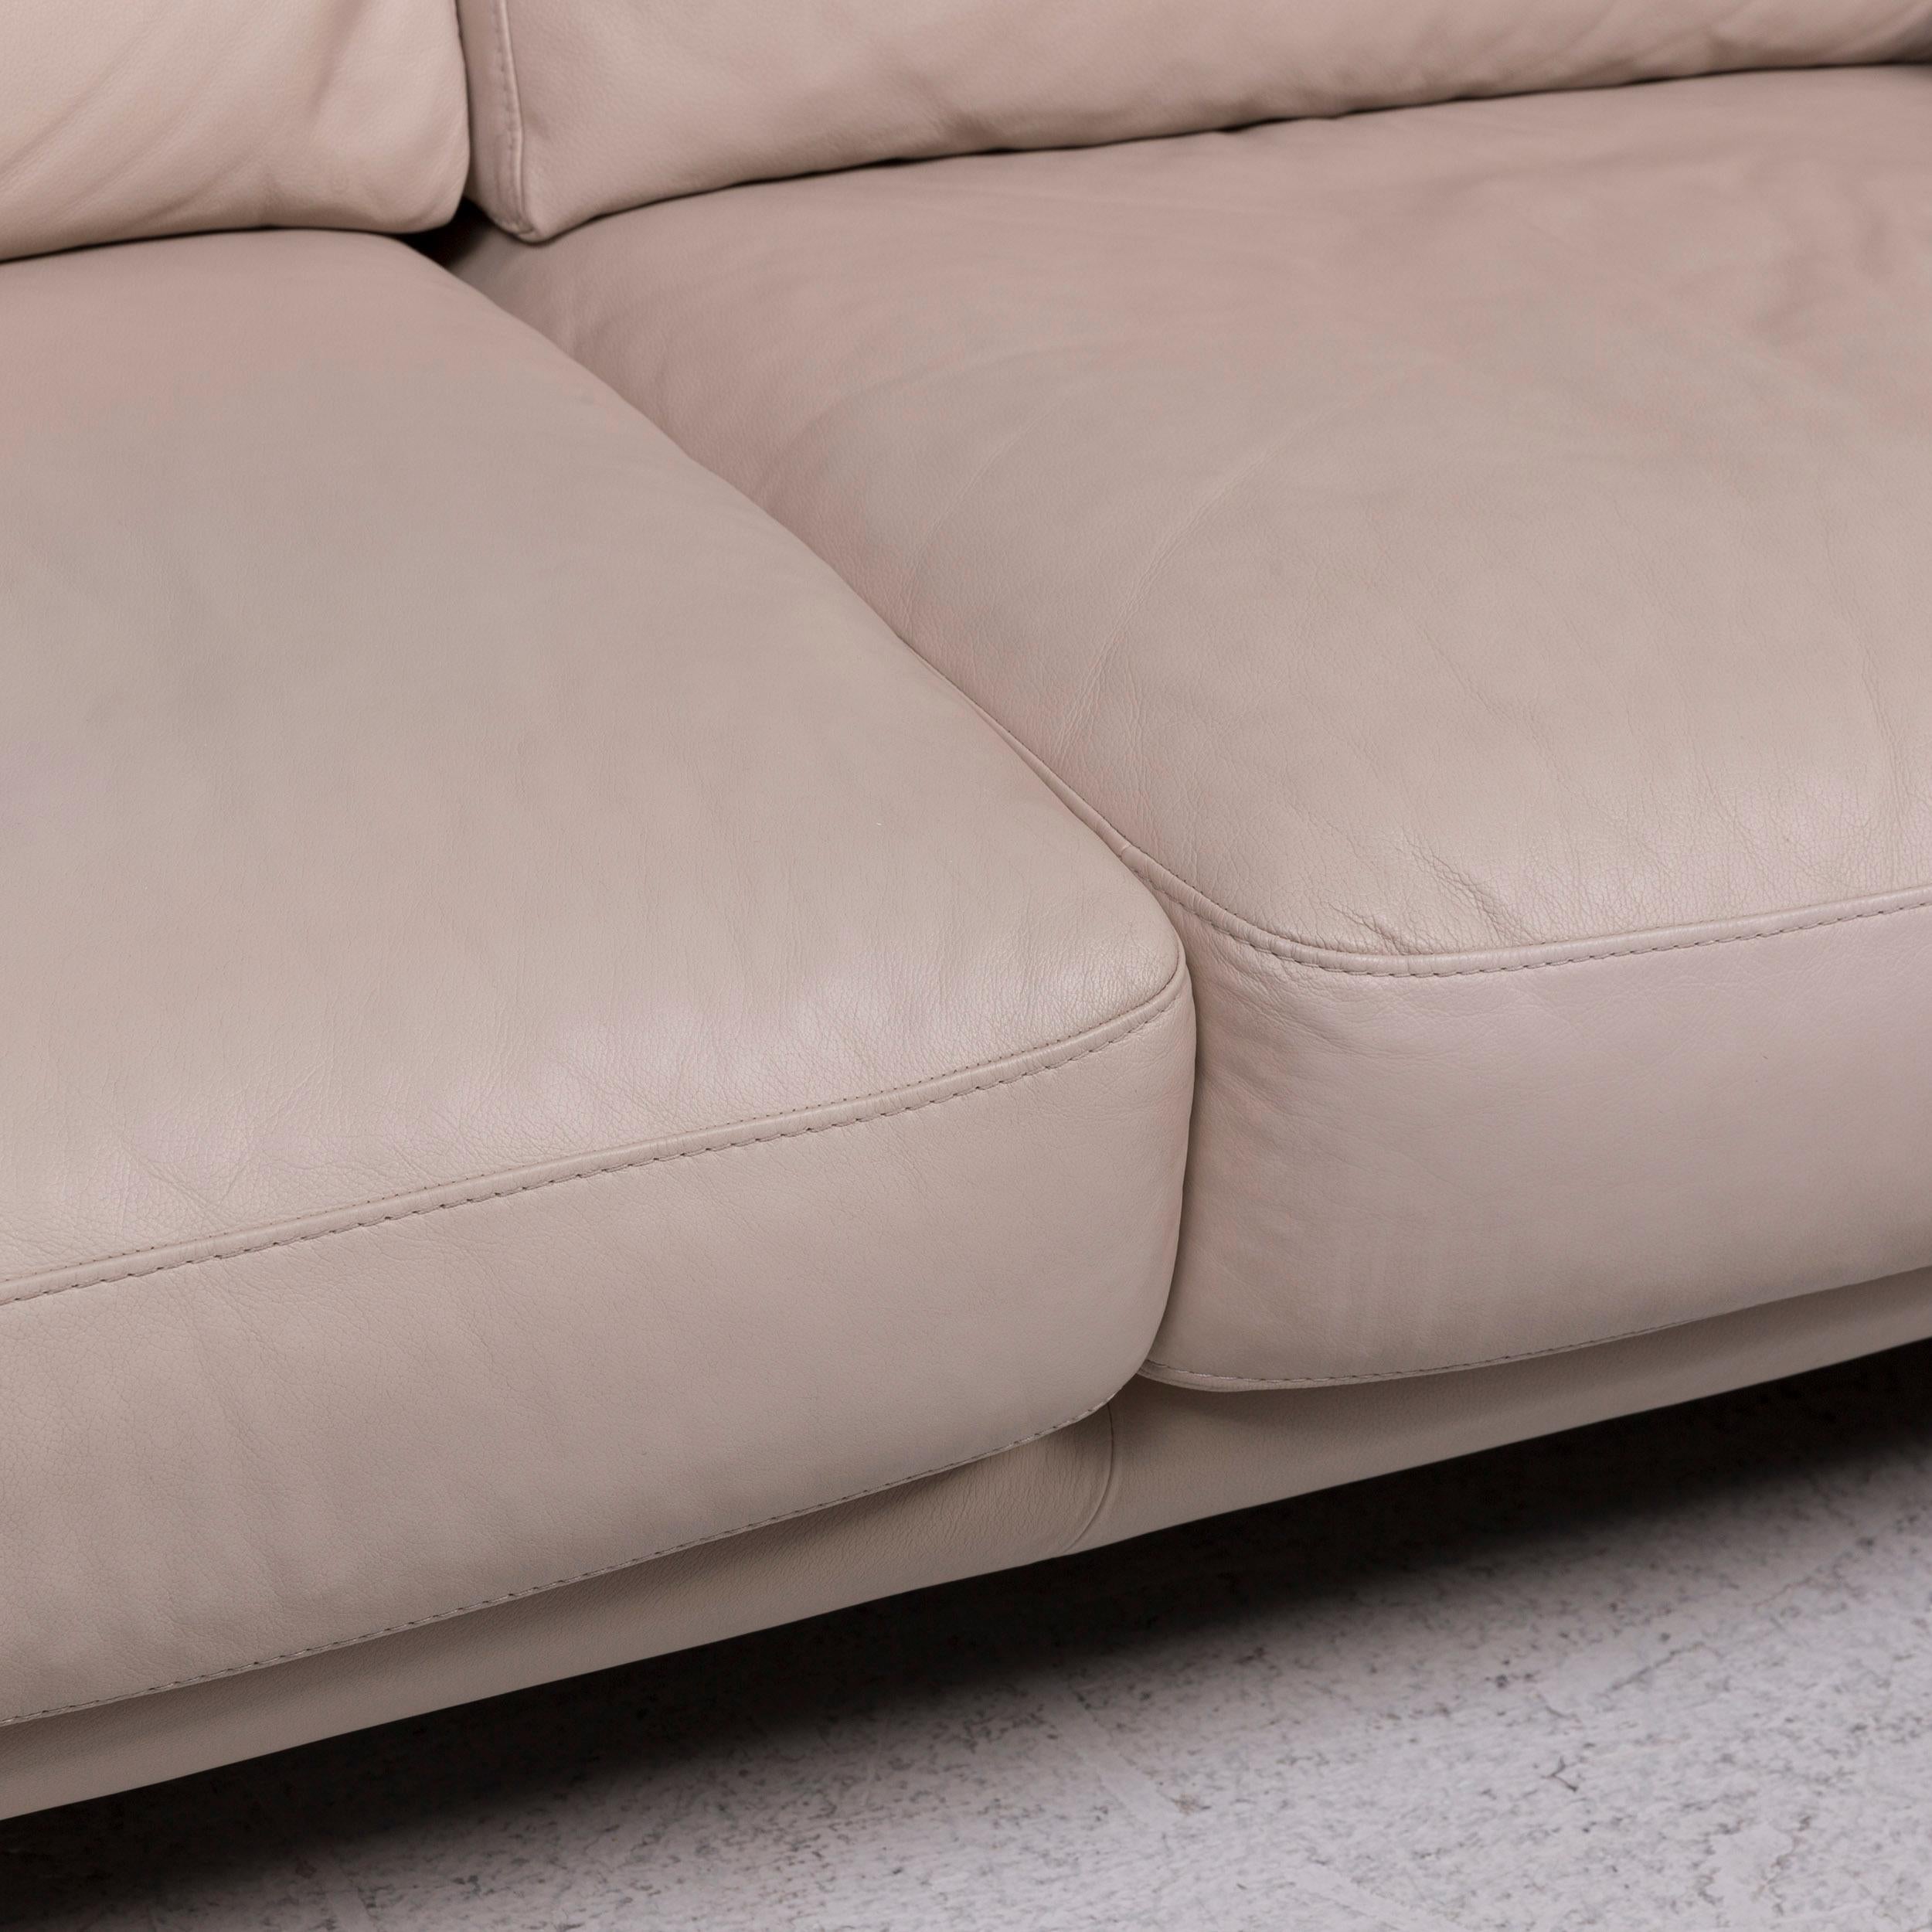 We bring to you a Willi Schillig leather sofa cream two-seater couch.
 

 Product measurements in centimeters:
 

Depth 97
Width 175
Height 87
Seat-height 44
Rest-height 54
Seat-depth 54
Seat-width 117
Back-height 47.
 